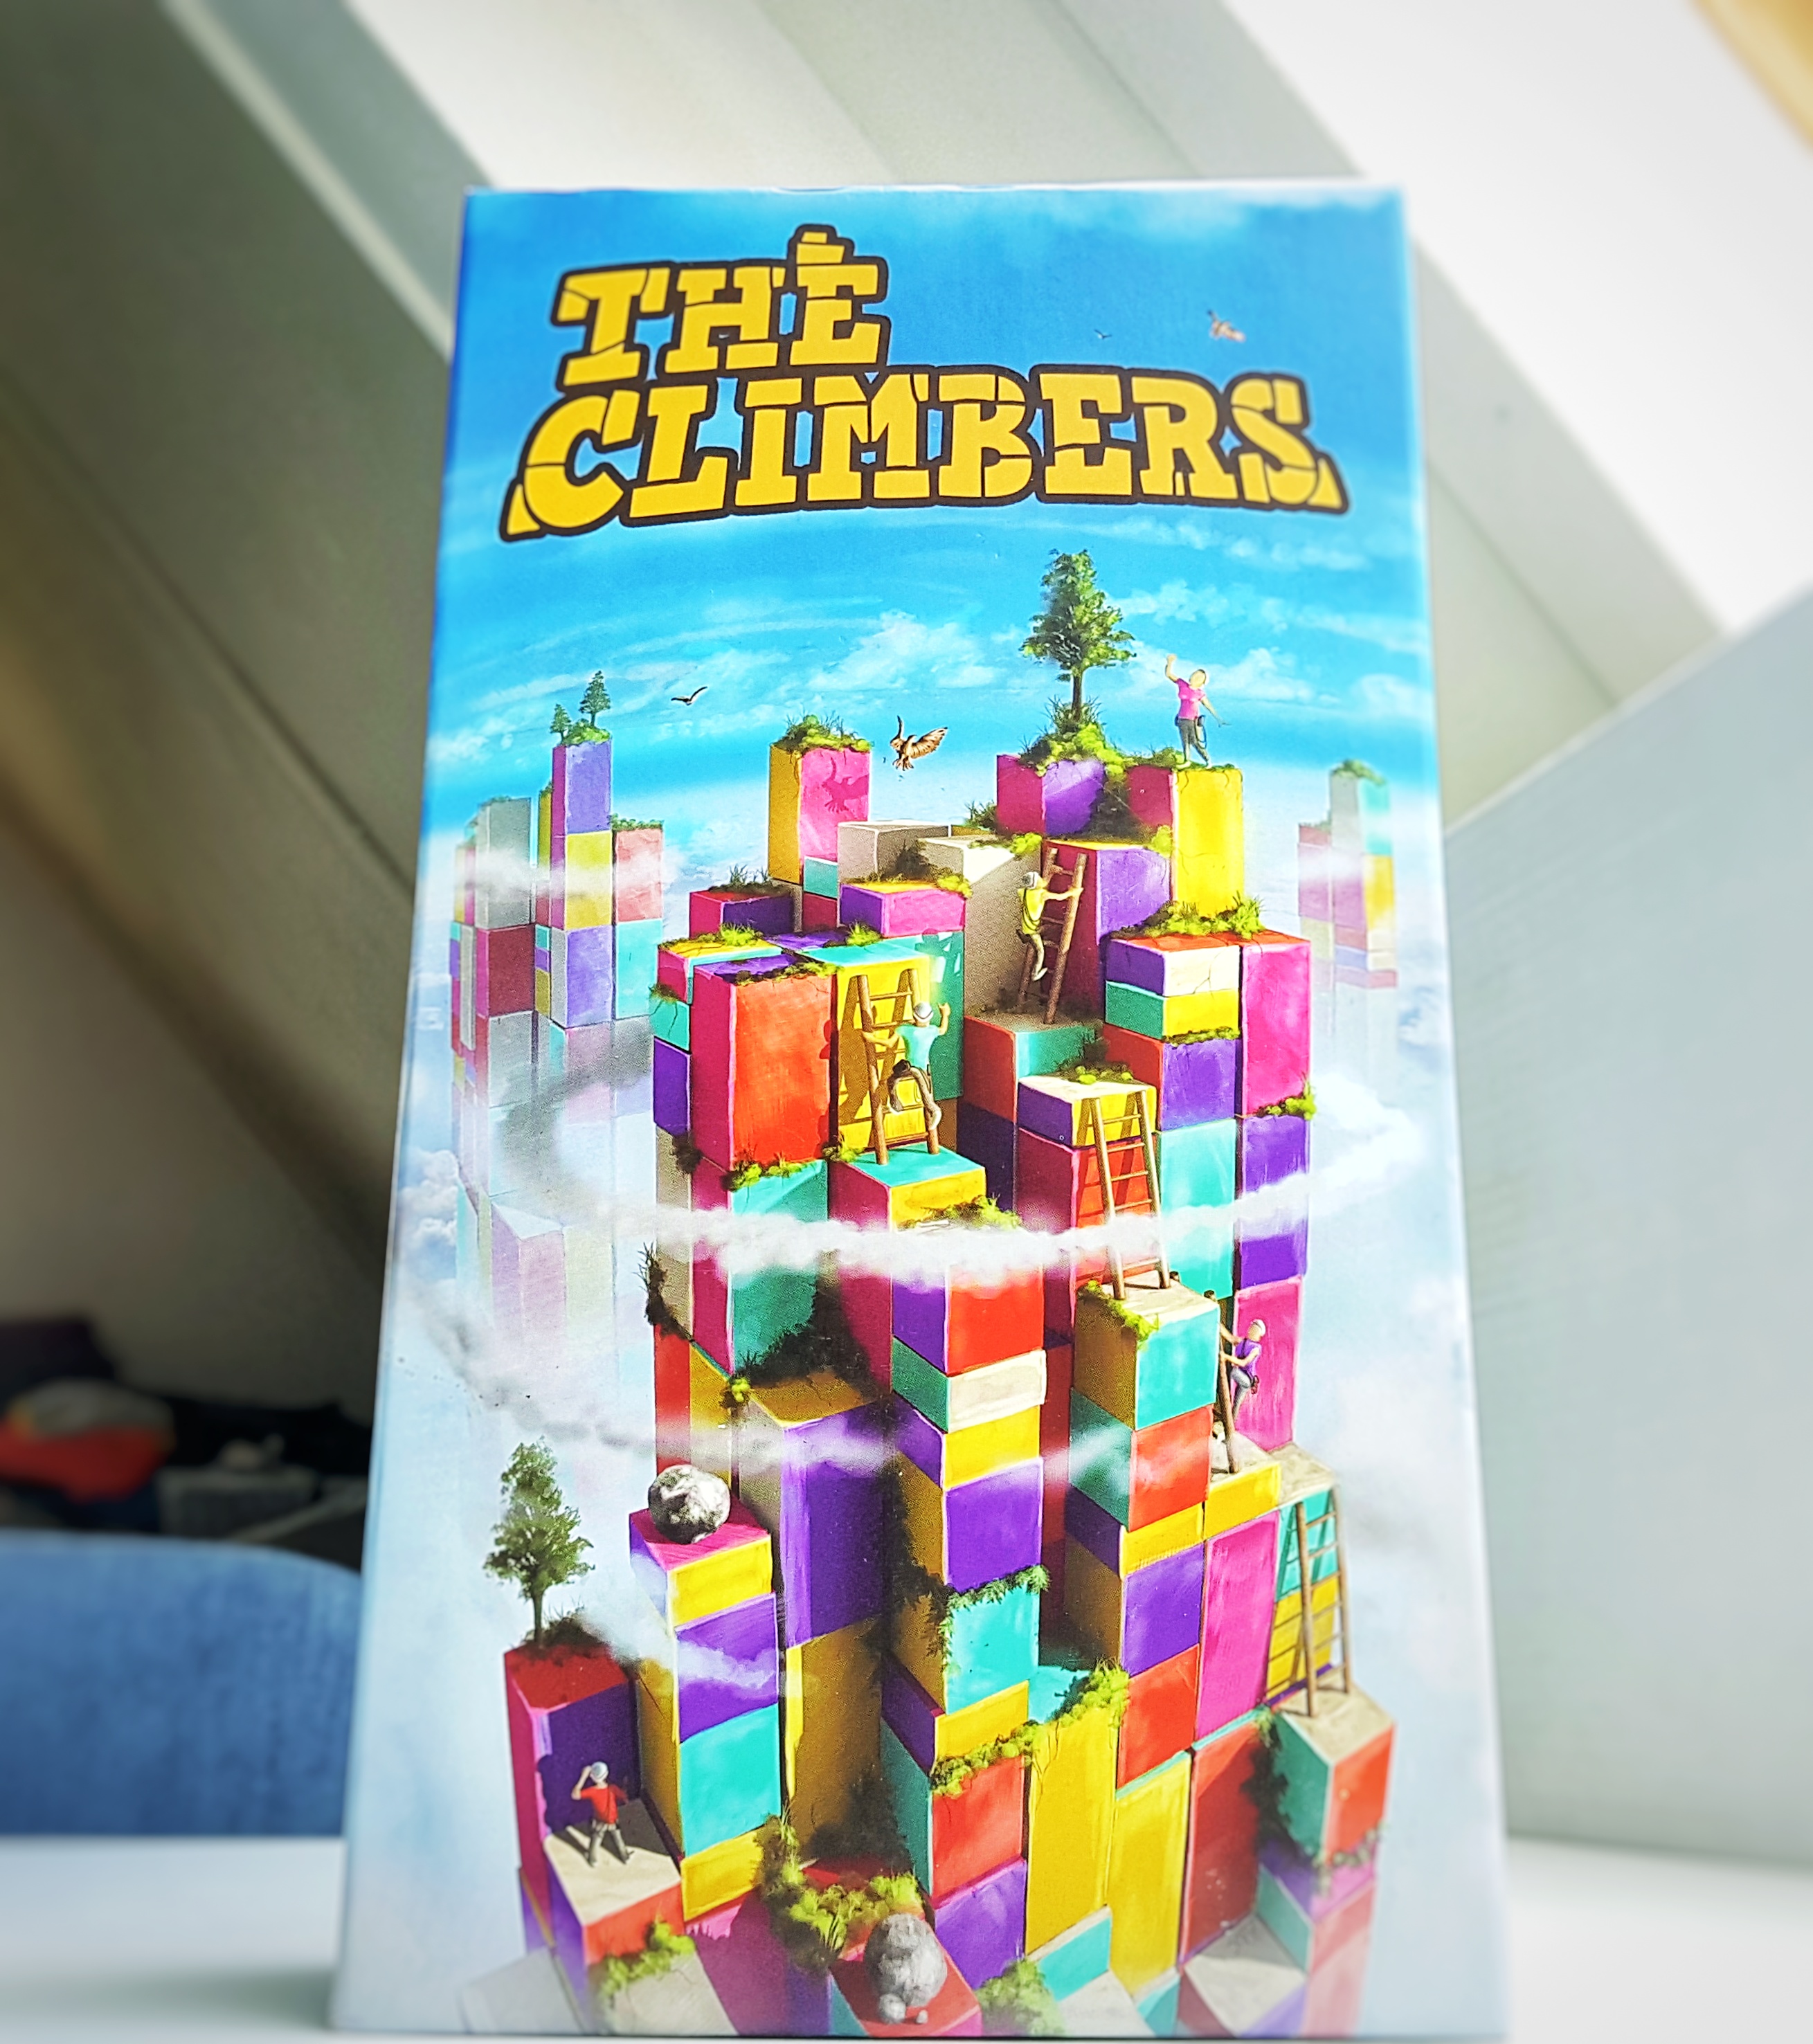 The Climbers by Capstone Games and Simply Complex